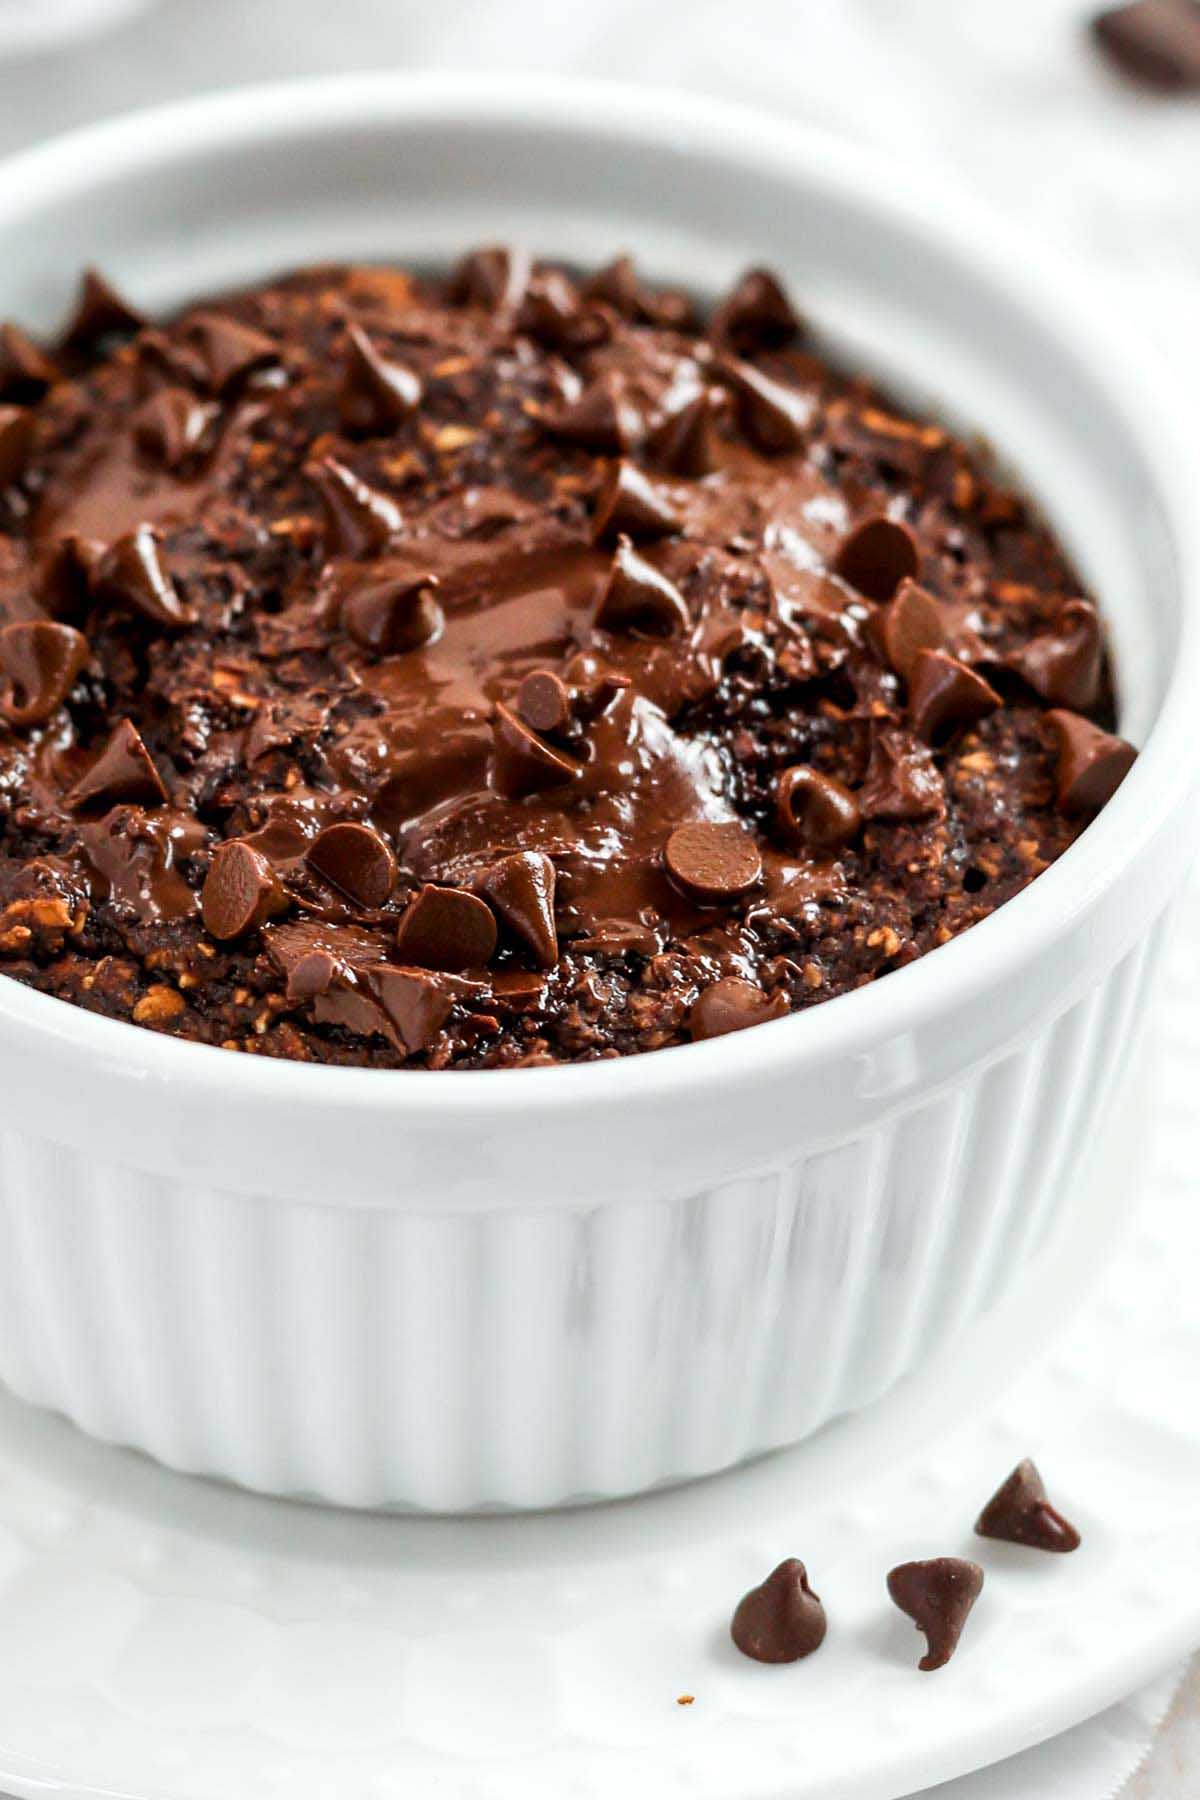 a close-up photo of chocolate baked oats with melted chocolate on top, fresh out of the oven.